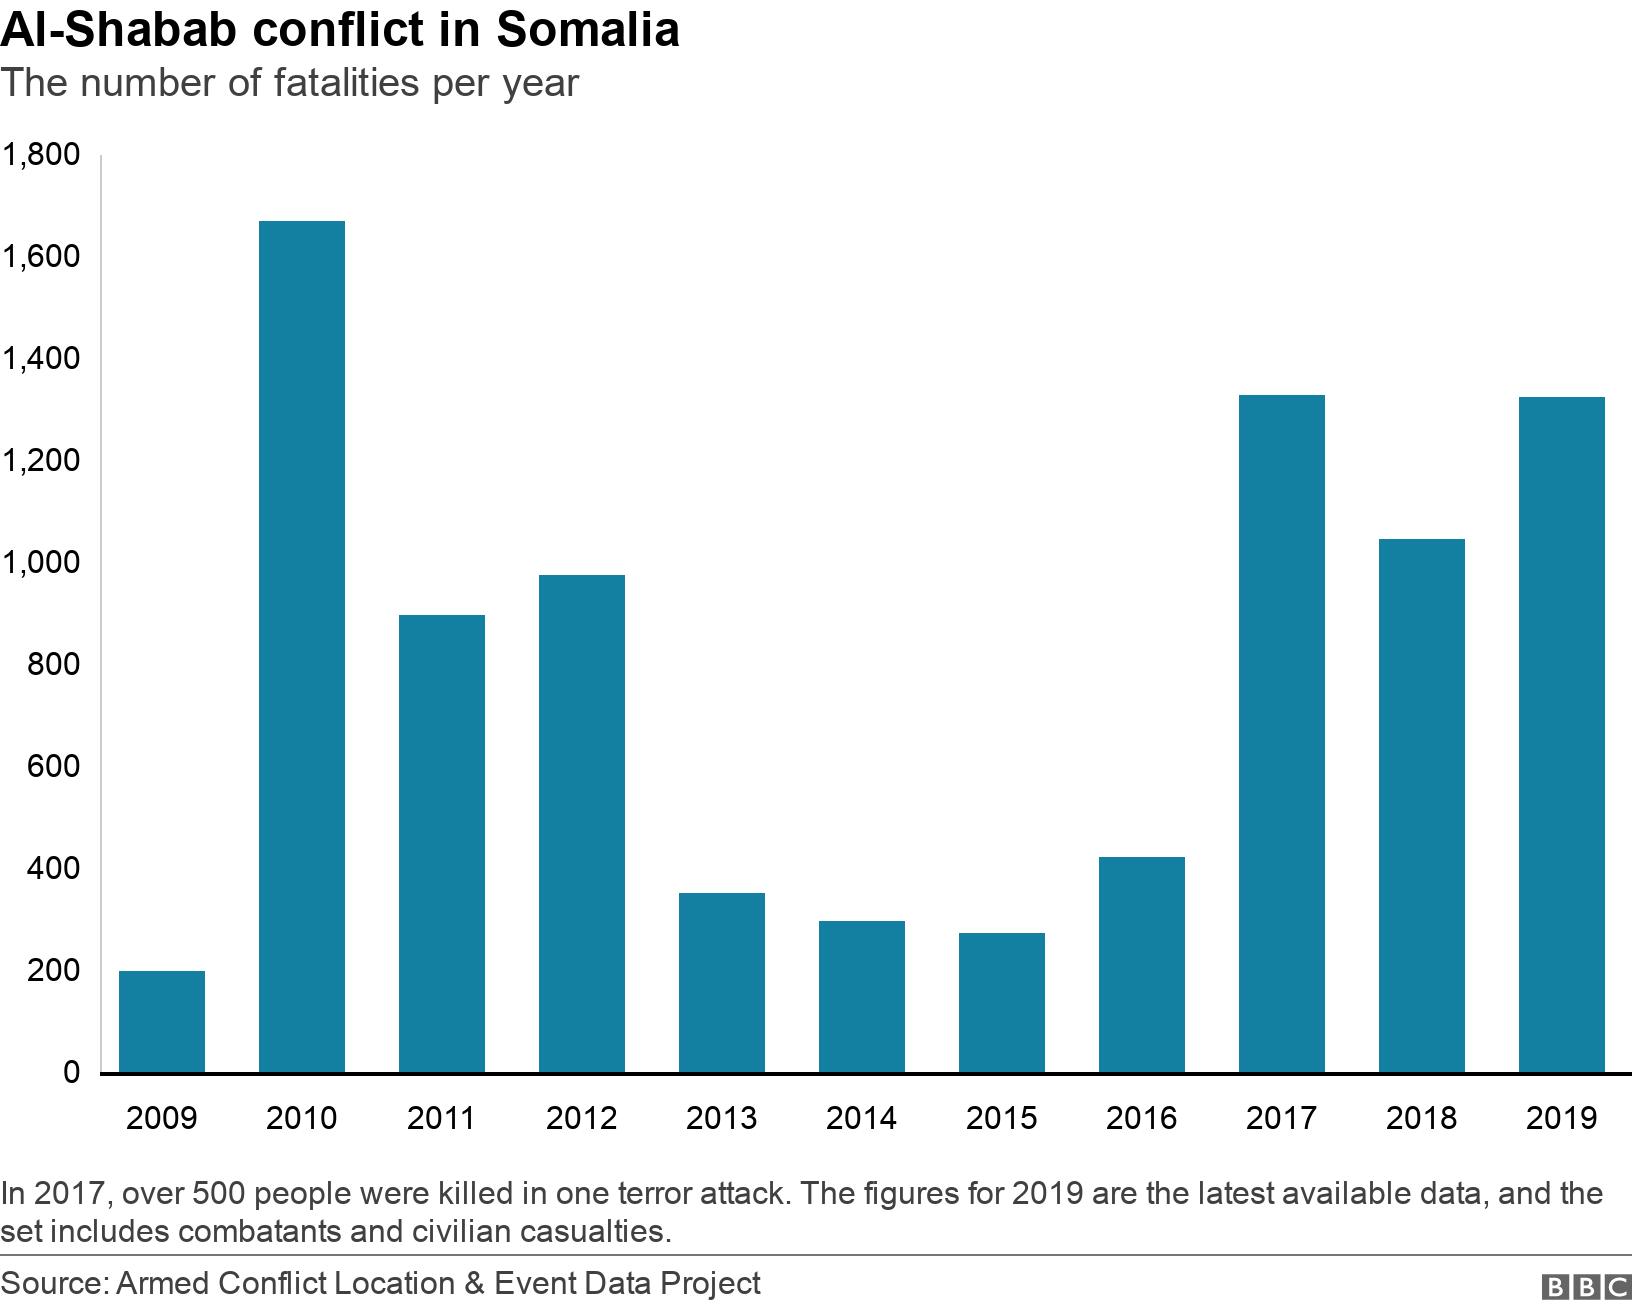 Al-Shabab conflict in Somalia. The number of fatalities per year. In 2017, over 500 people were killed in one terror attack. The figures for 2019 are the latest available data, and the set includes combatants and civilian casualties. .